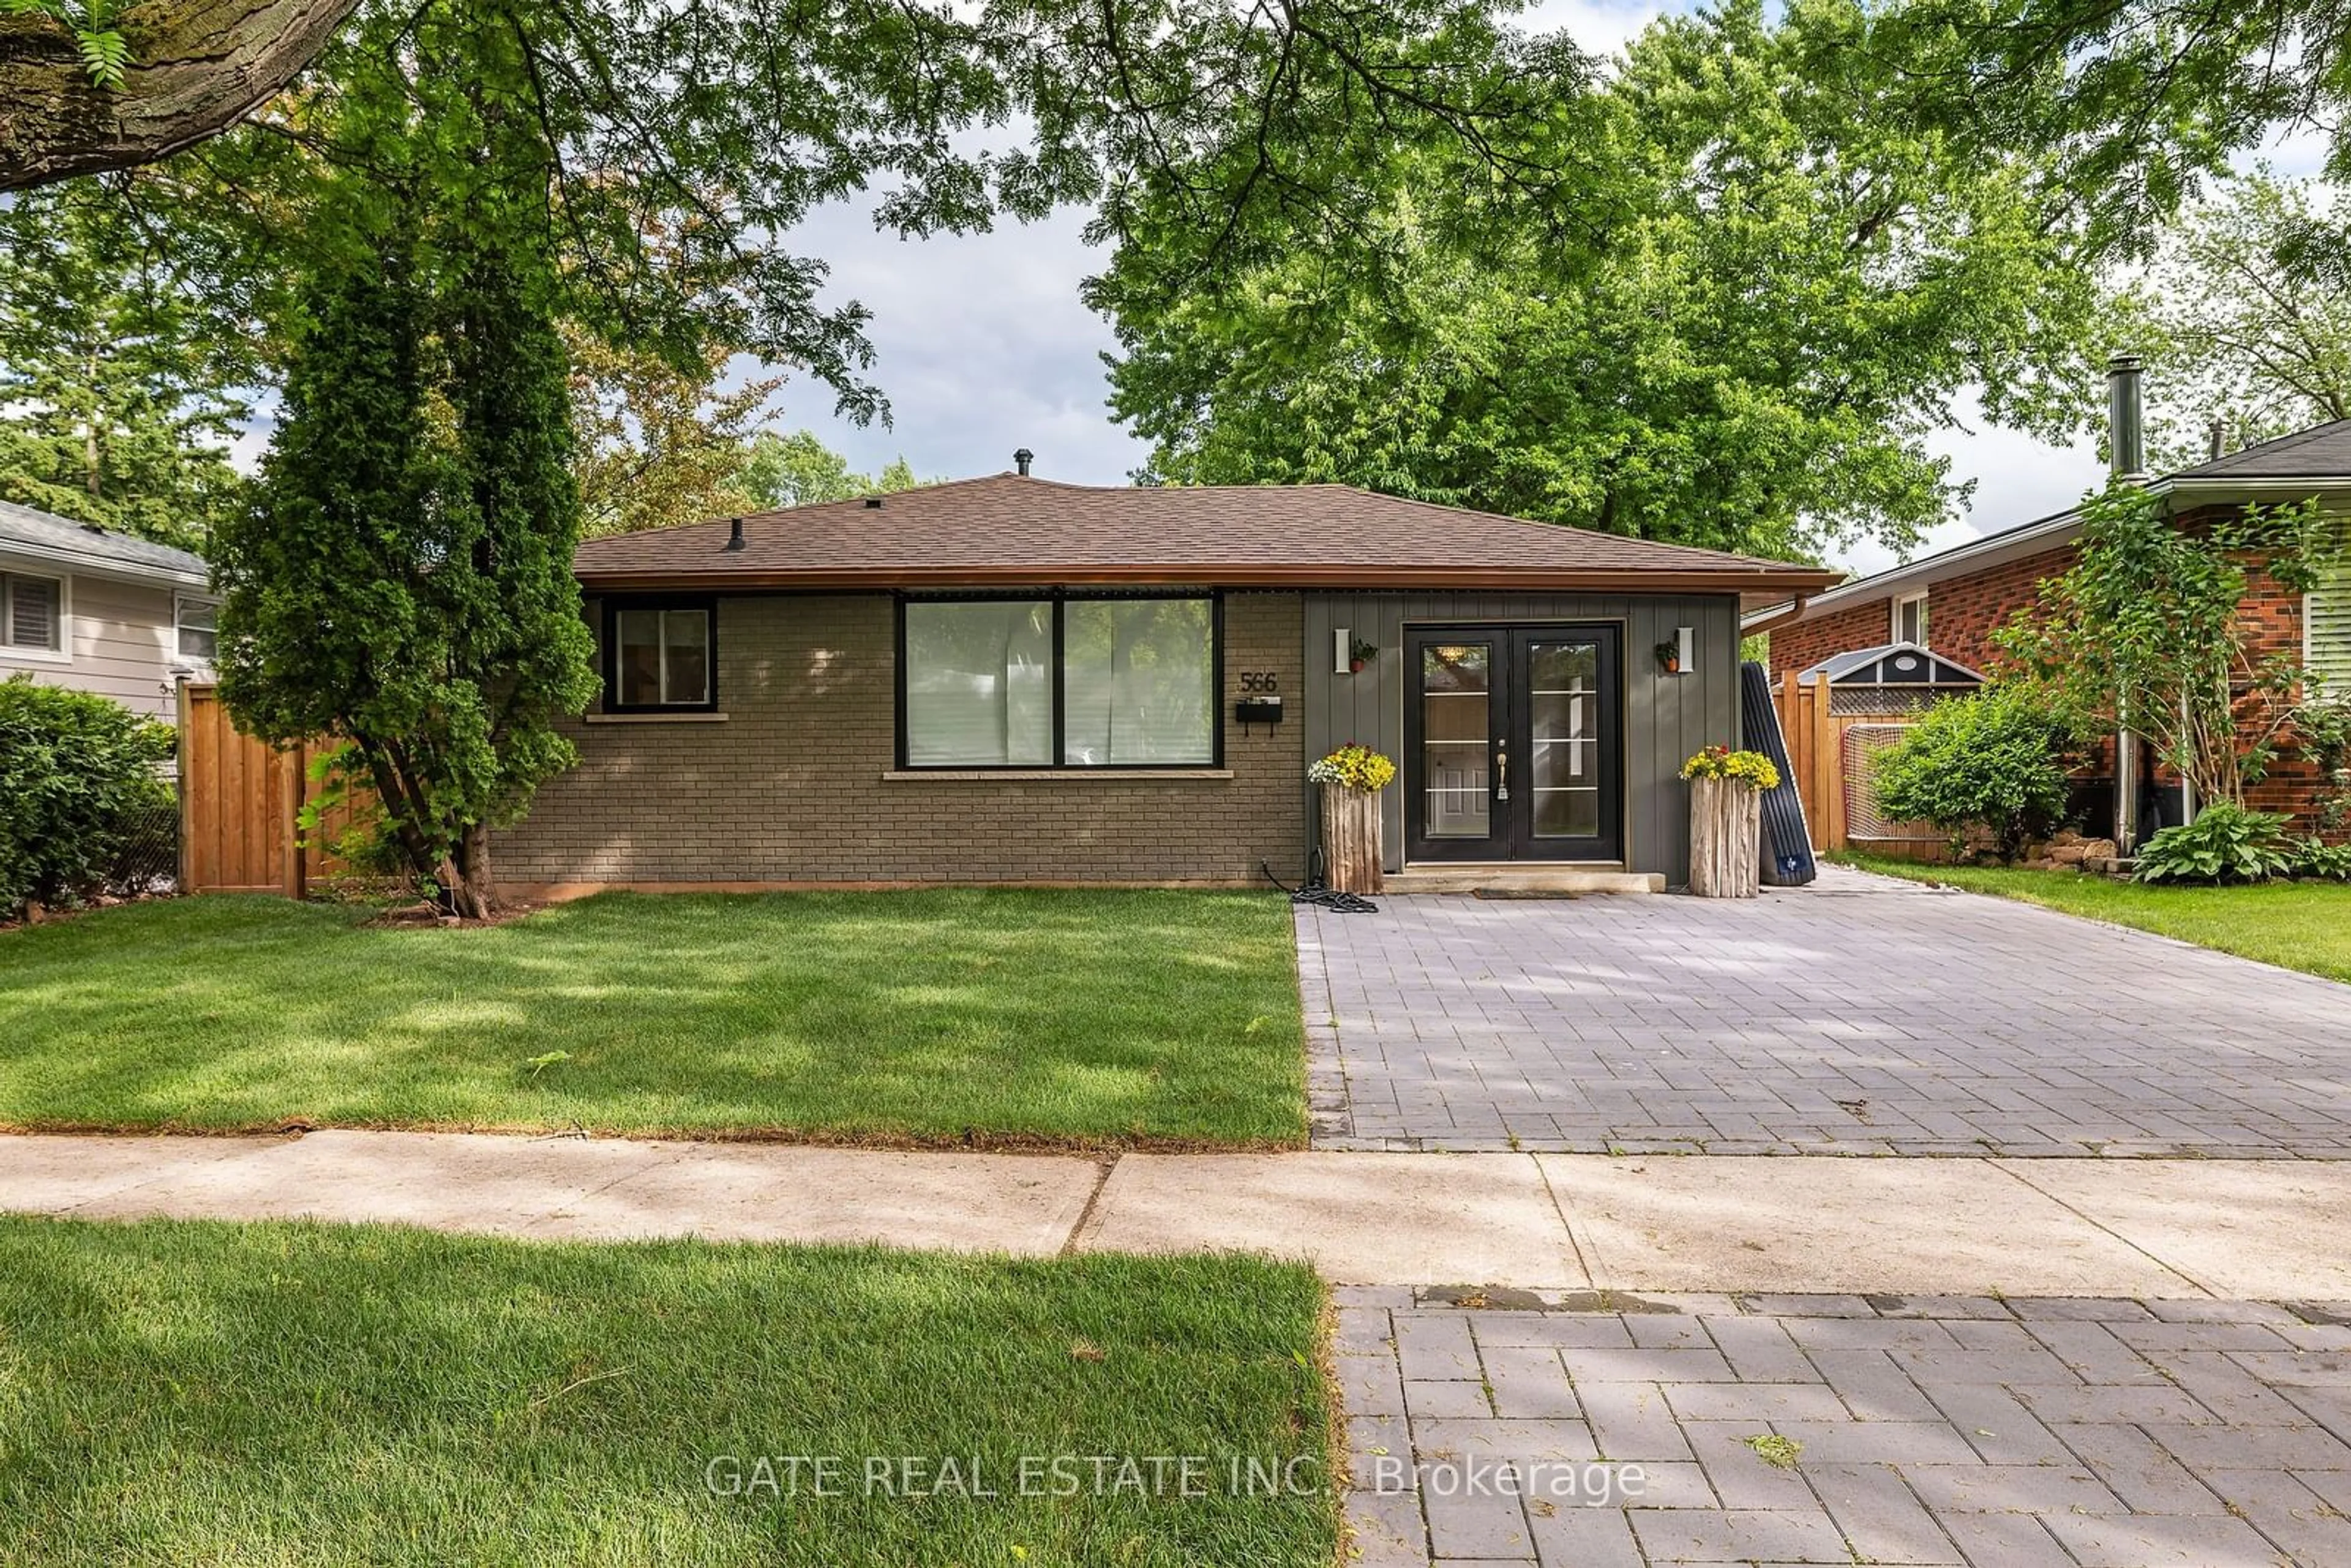 Home with brick exterior material for 566 LOUISE Dr, Burlington Ontario L7L 2T9